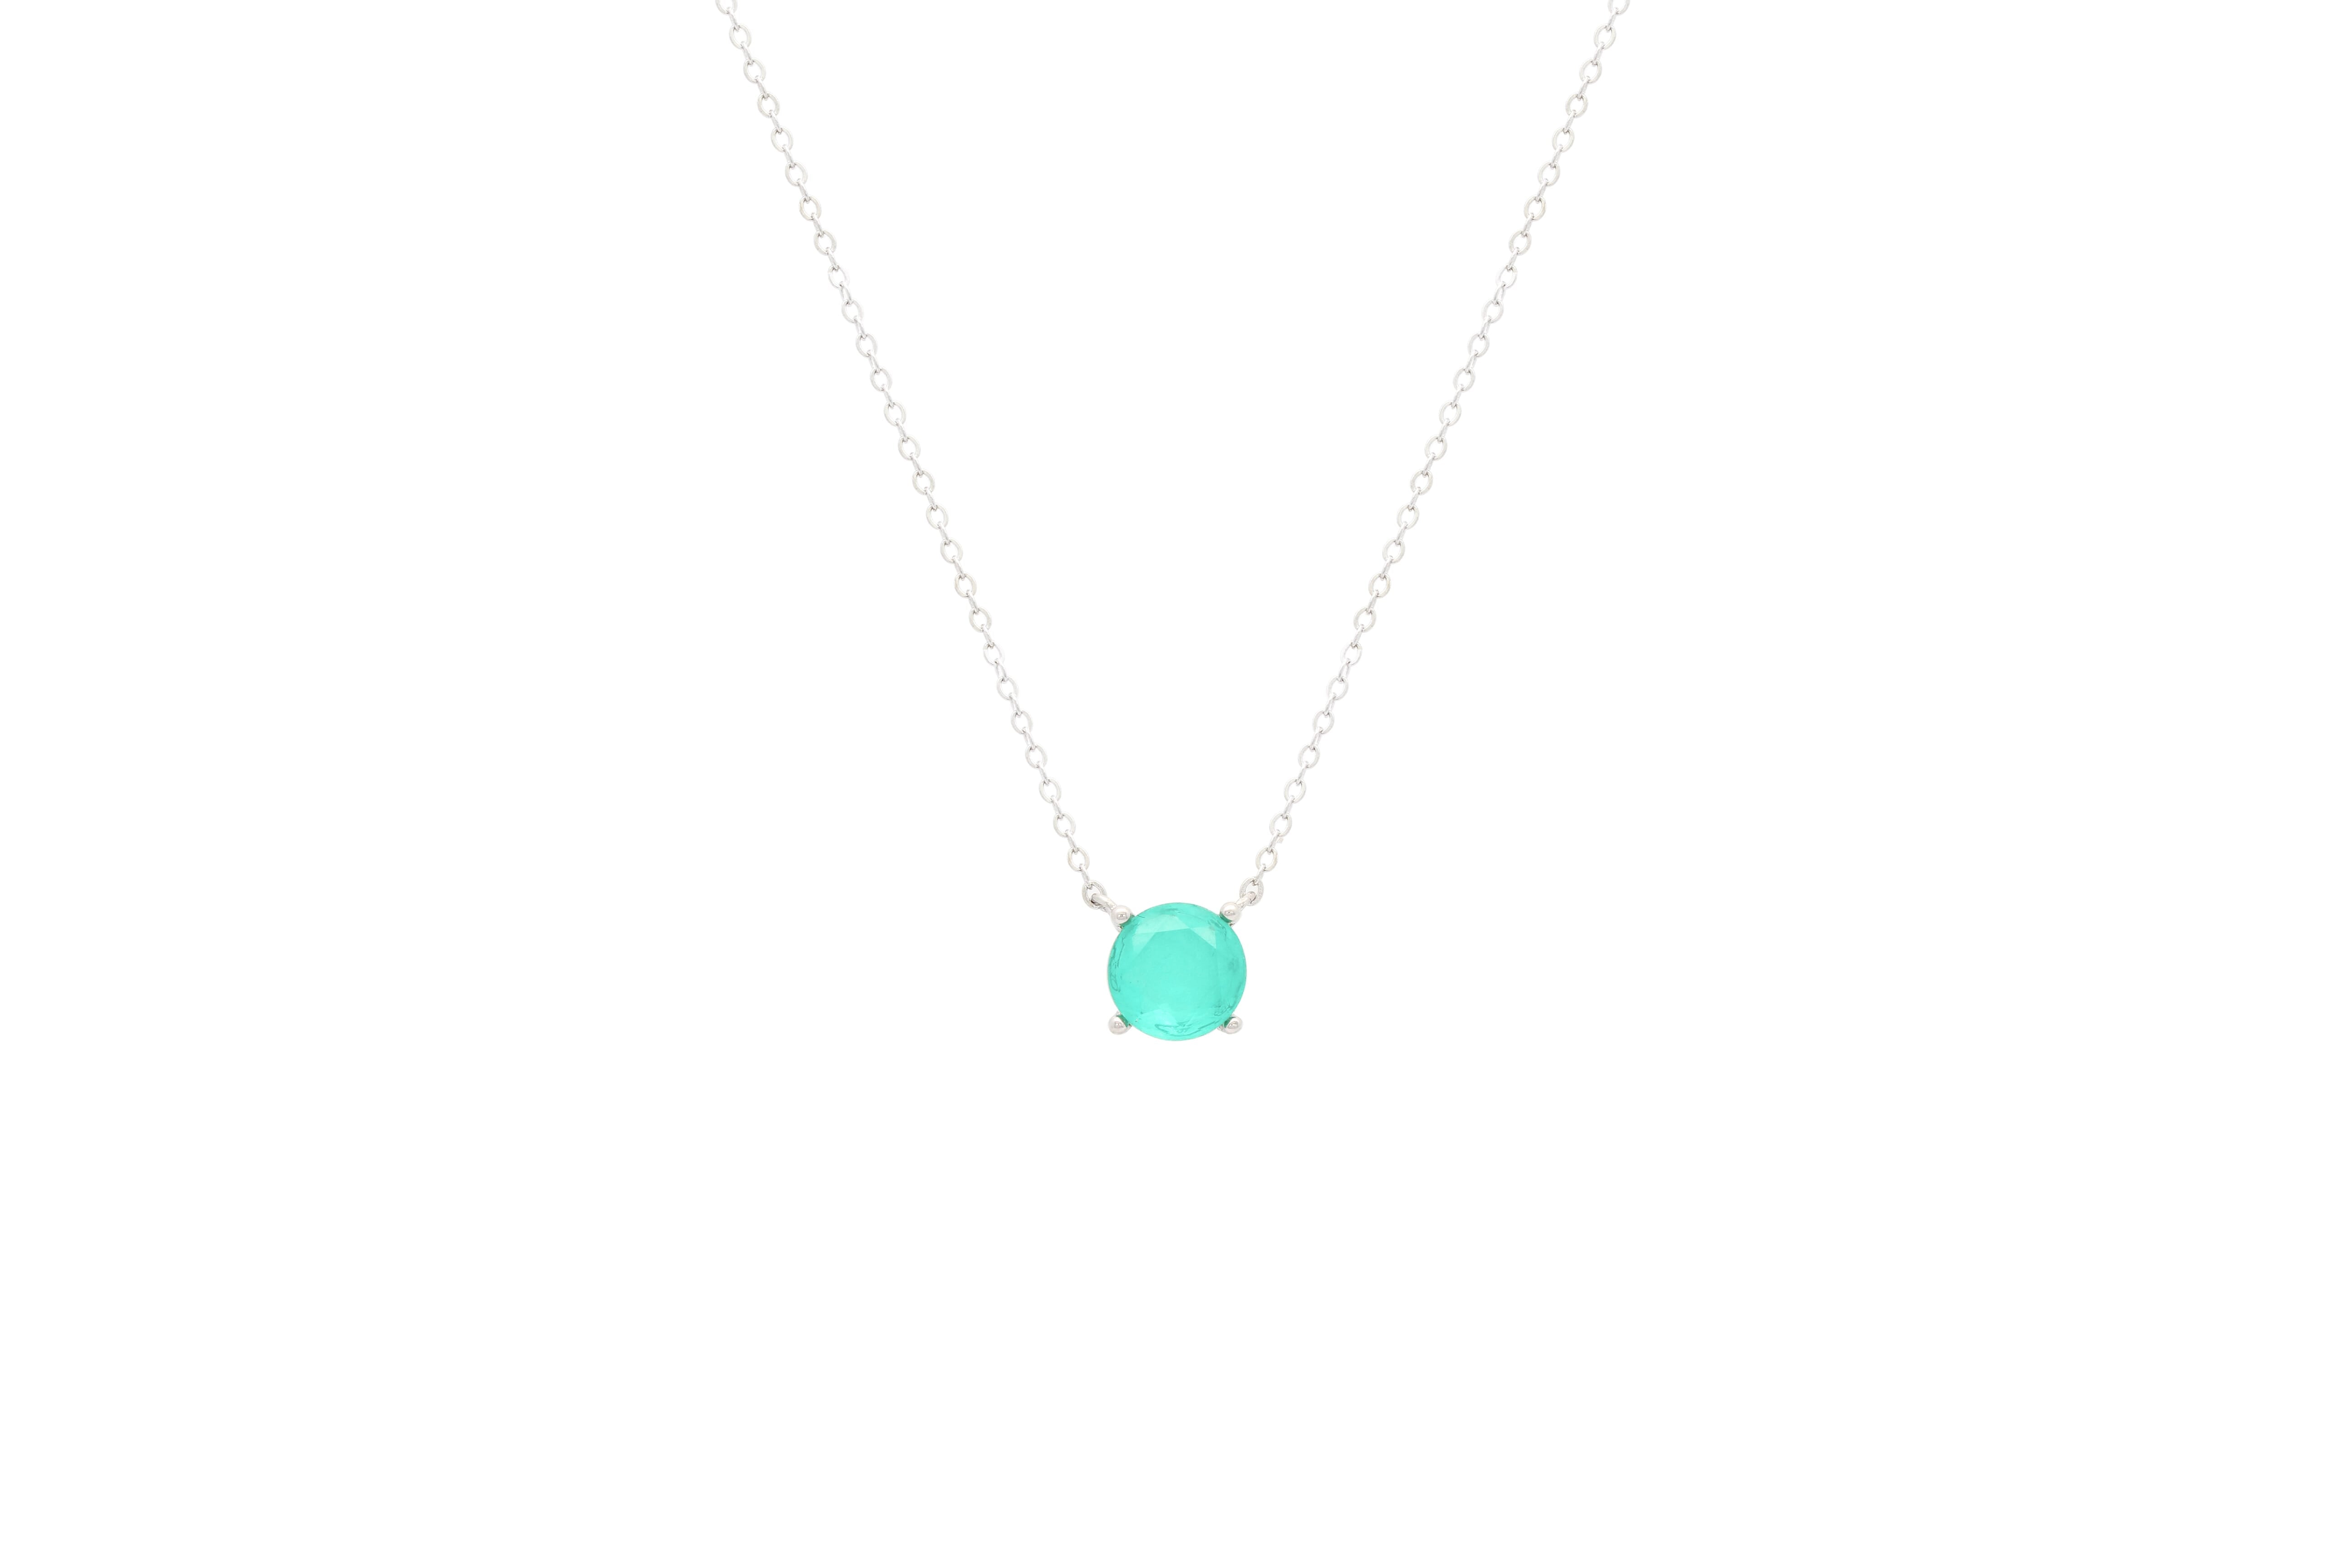 Asfour Crystal Chain Necklace With Aquamarine Round Design In 925 Sterling Silver ND0026-GC